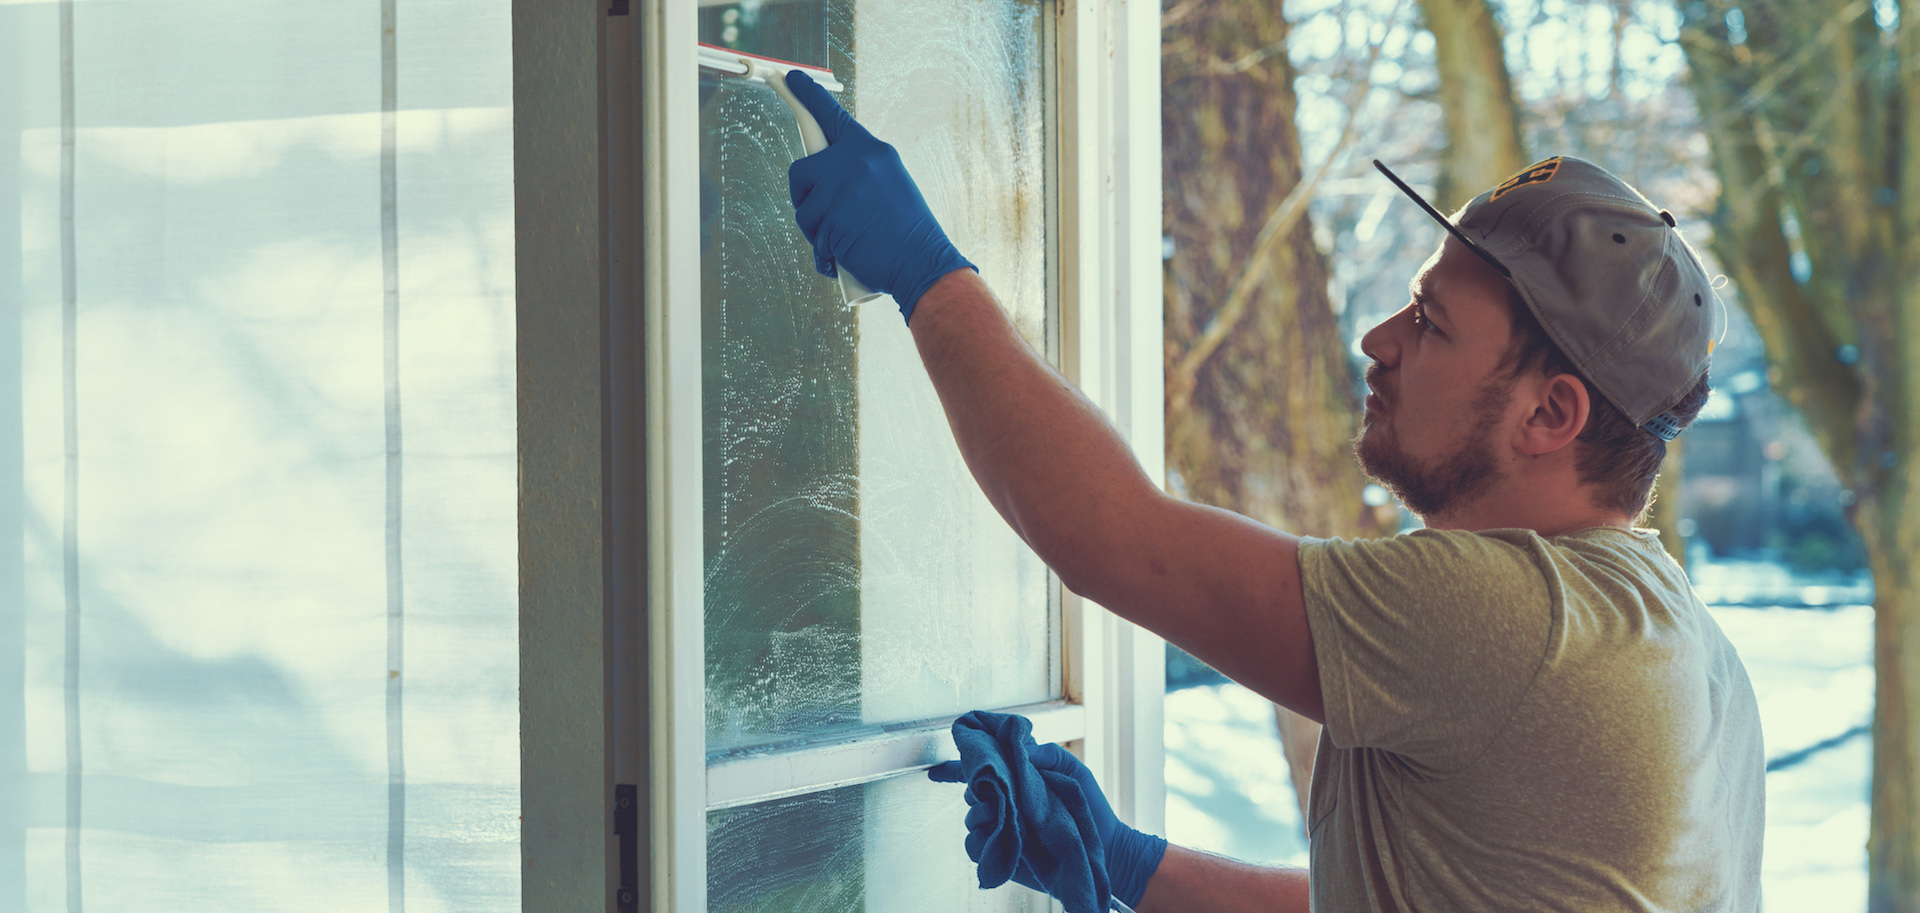 home window repair & scratch removal services